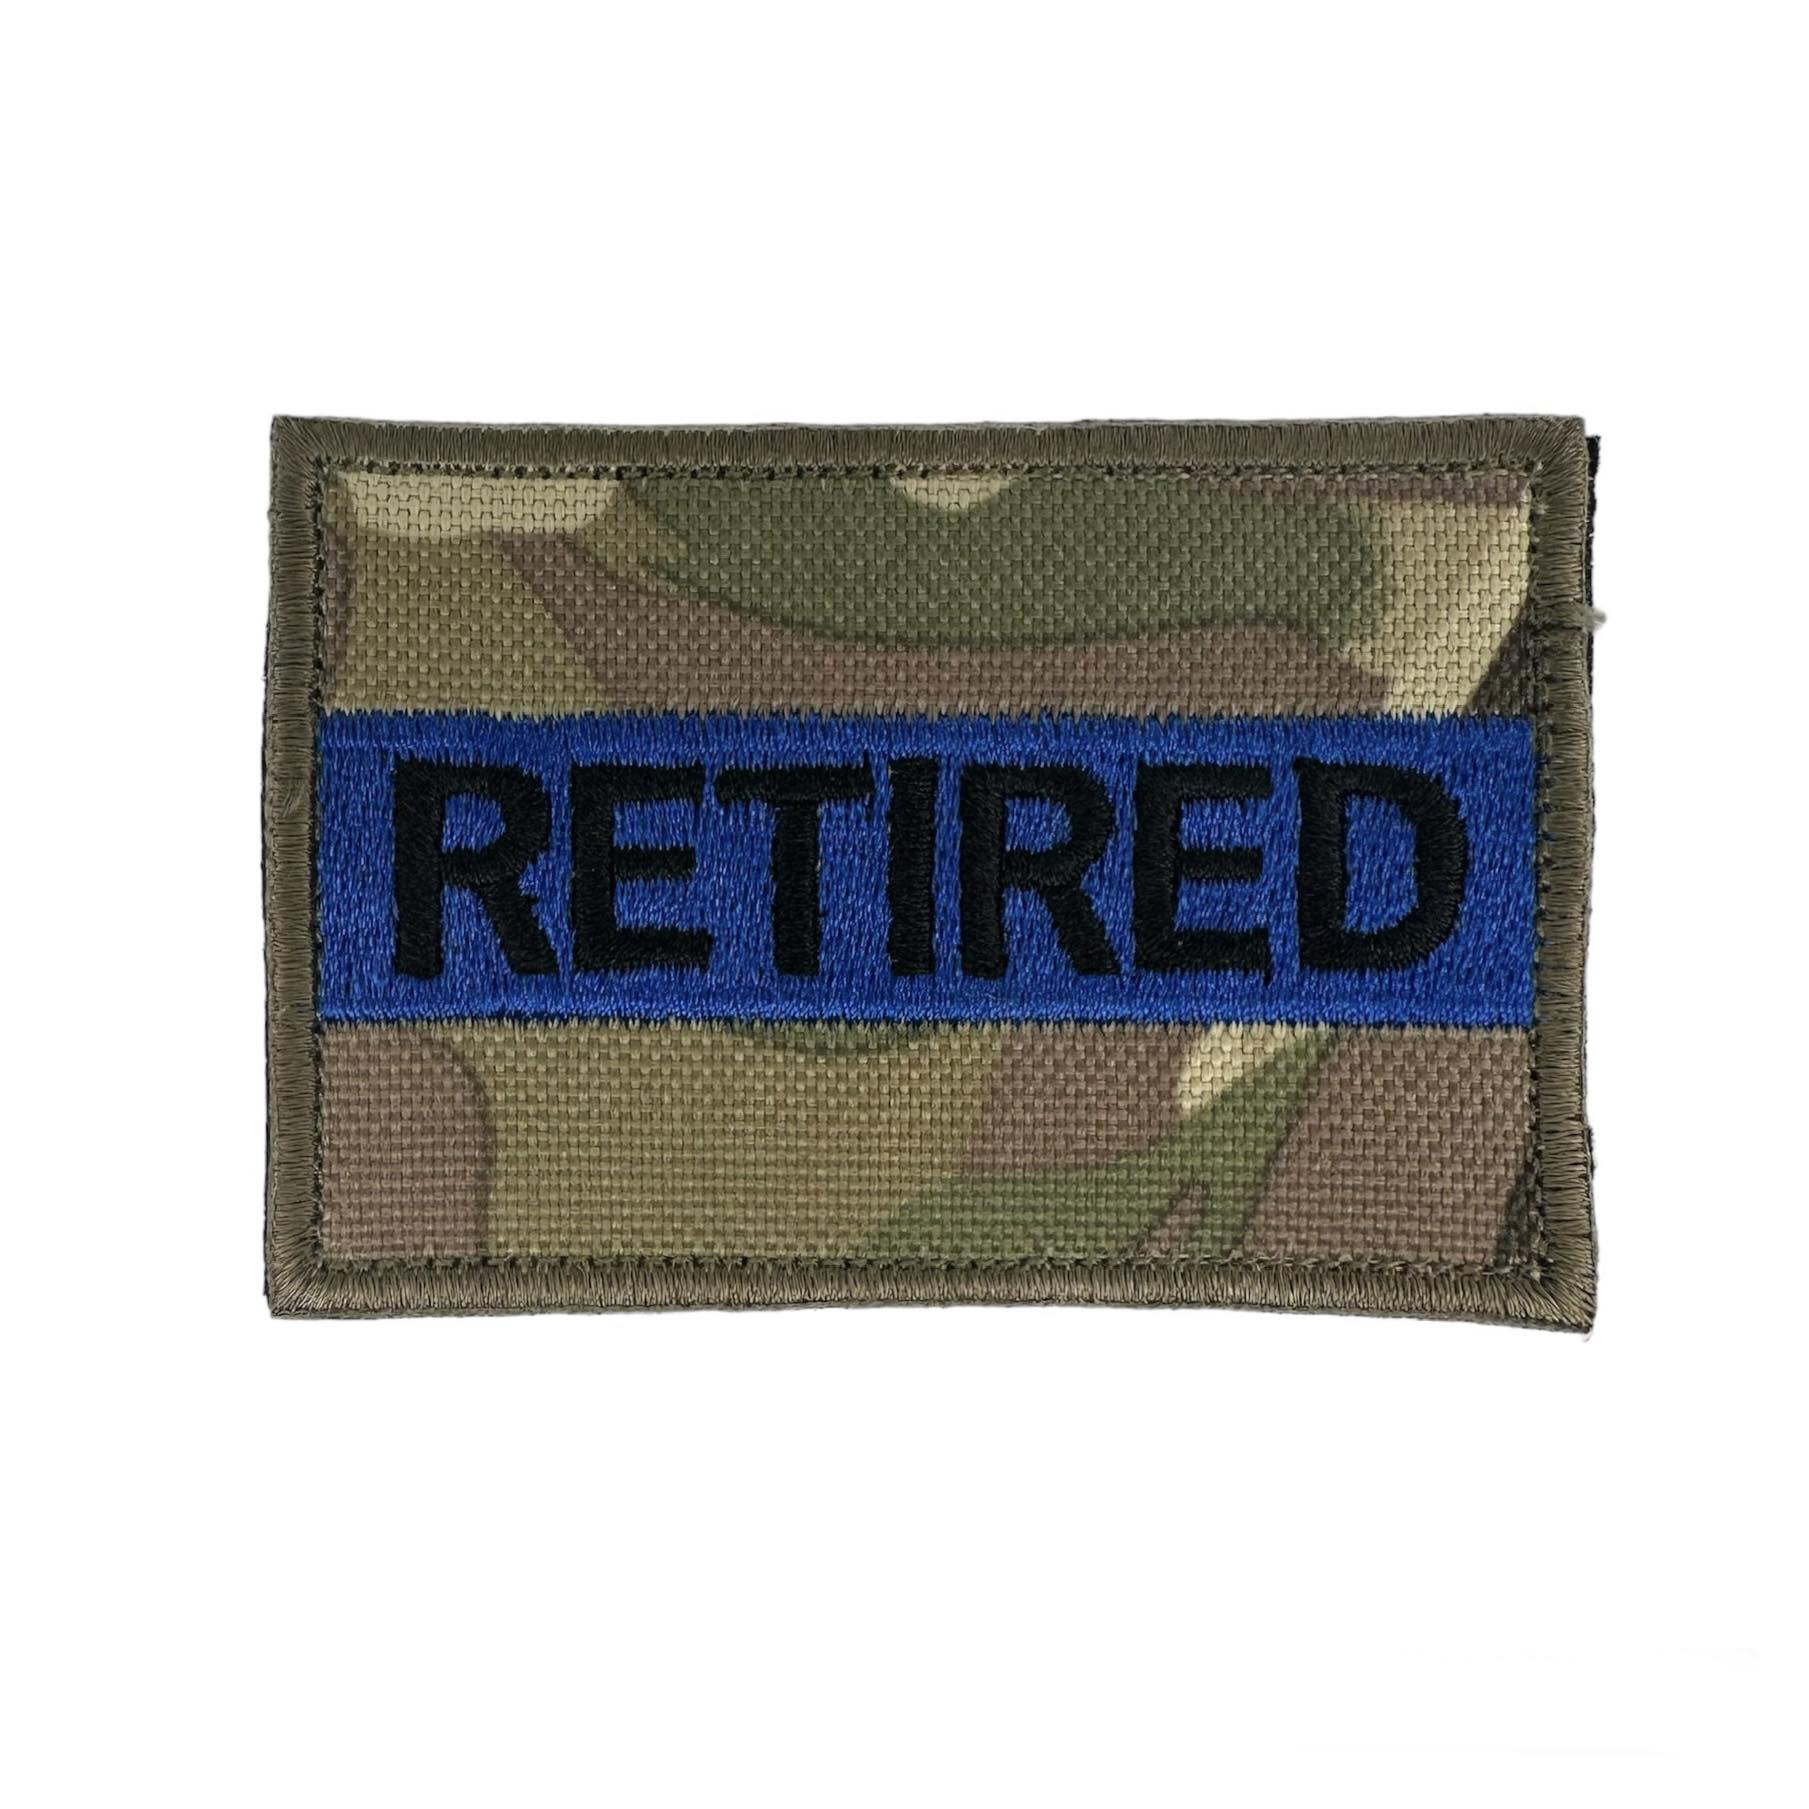 Embroidery Patch - Retired Multicam